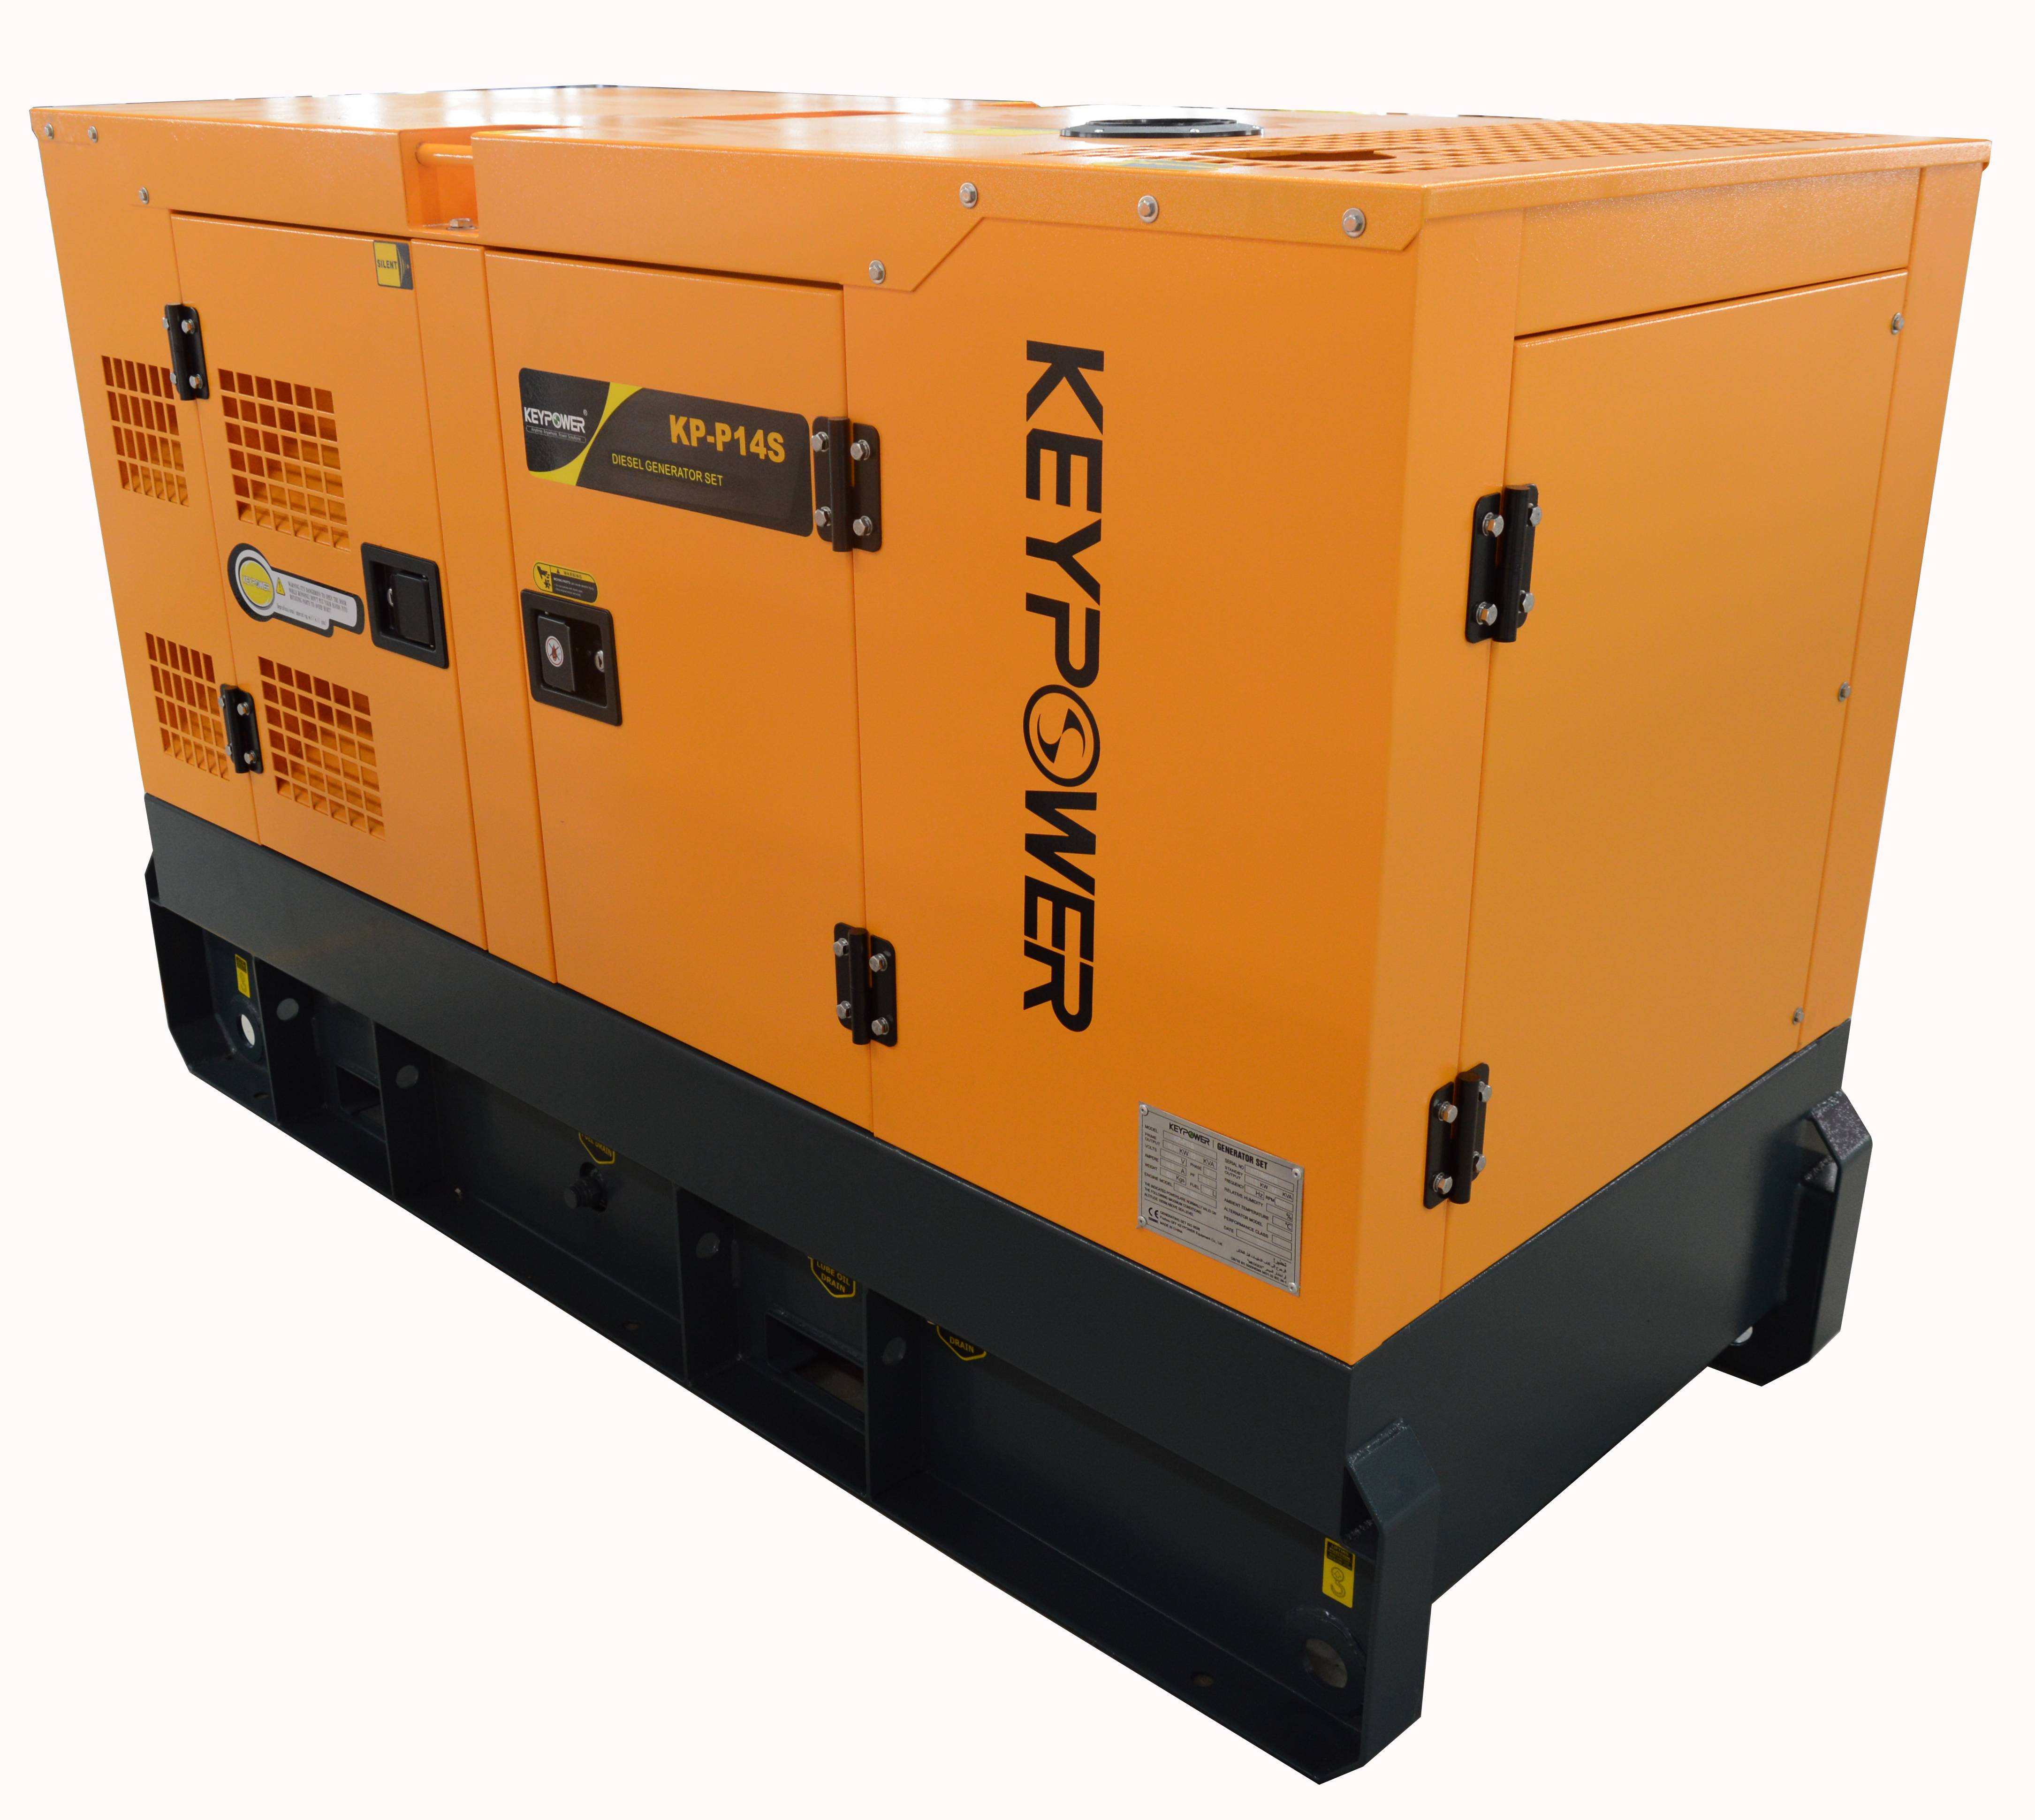 Pay attention to the purchase of diesel generator set!